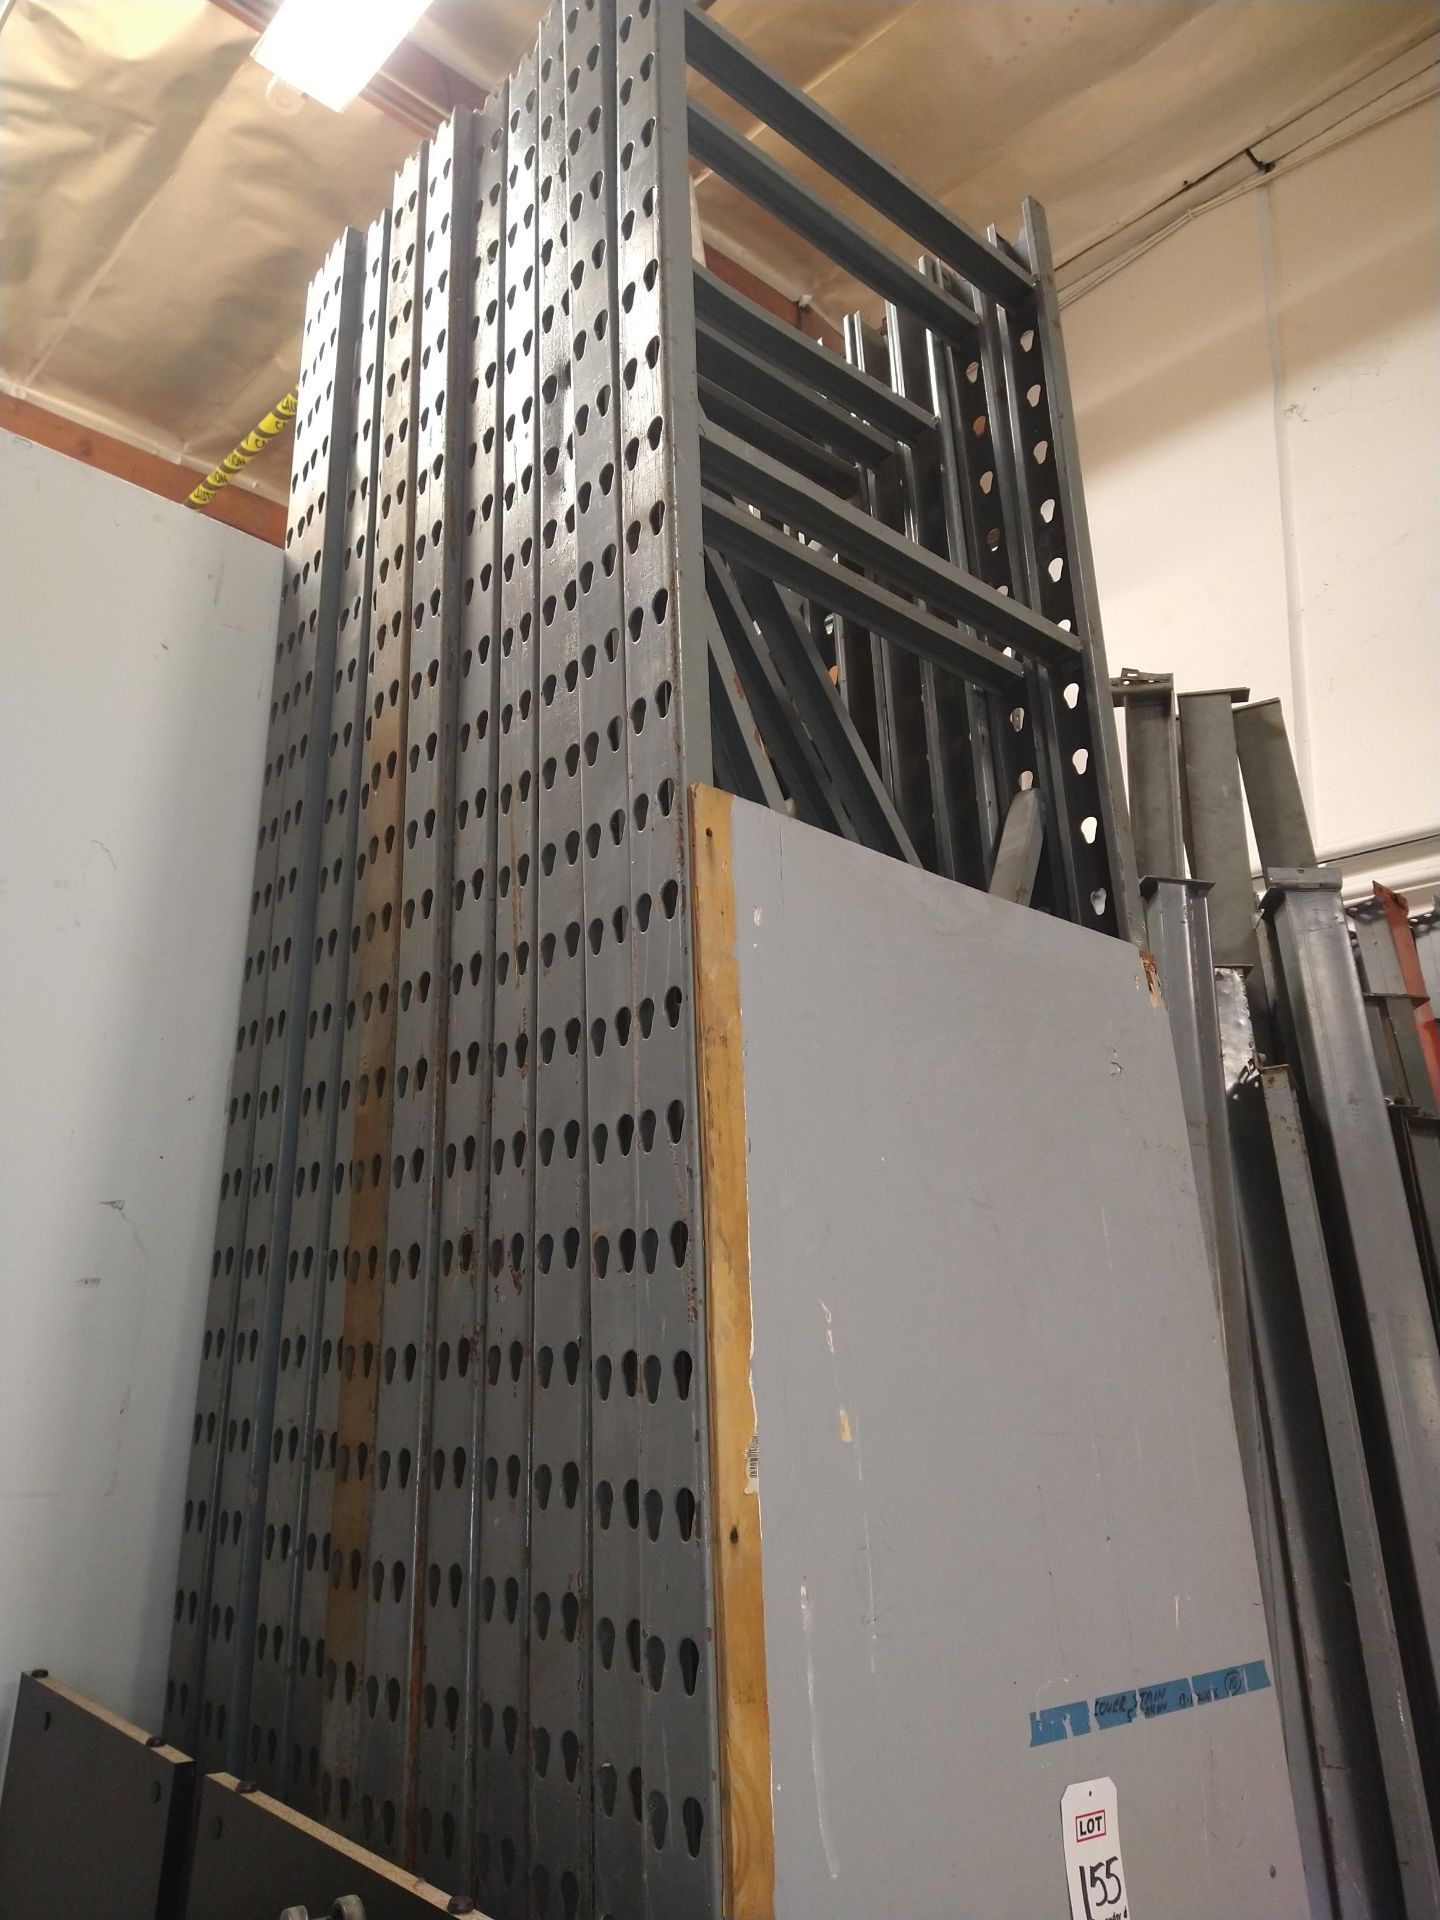 LOT - REMAINING DISASSEMBLED PALLET RACK IN BUILDING (LOCATION: ORANGE, CA) - Image 9 of 9